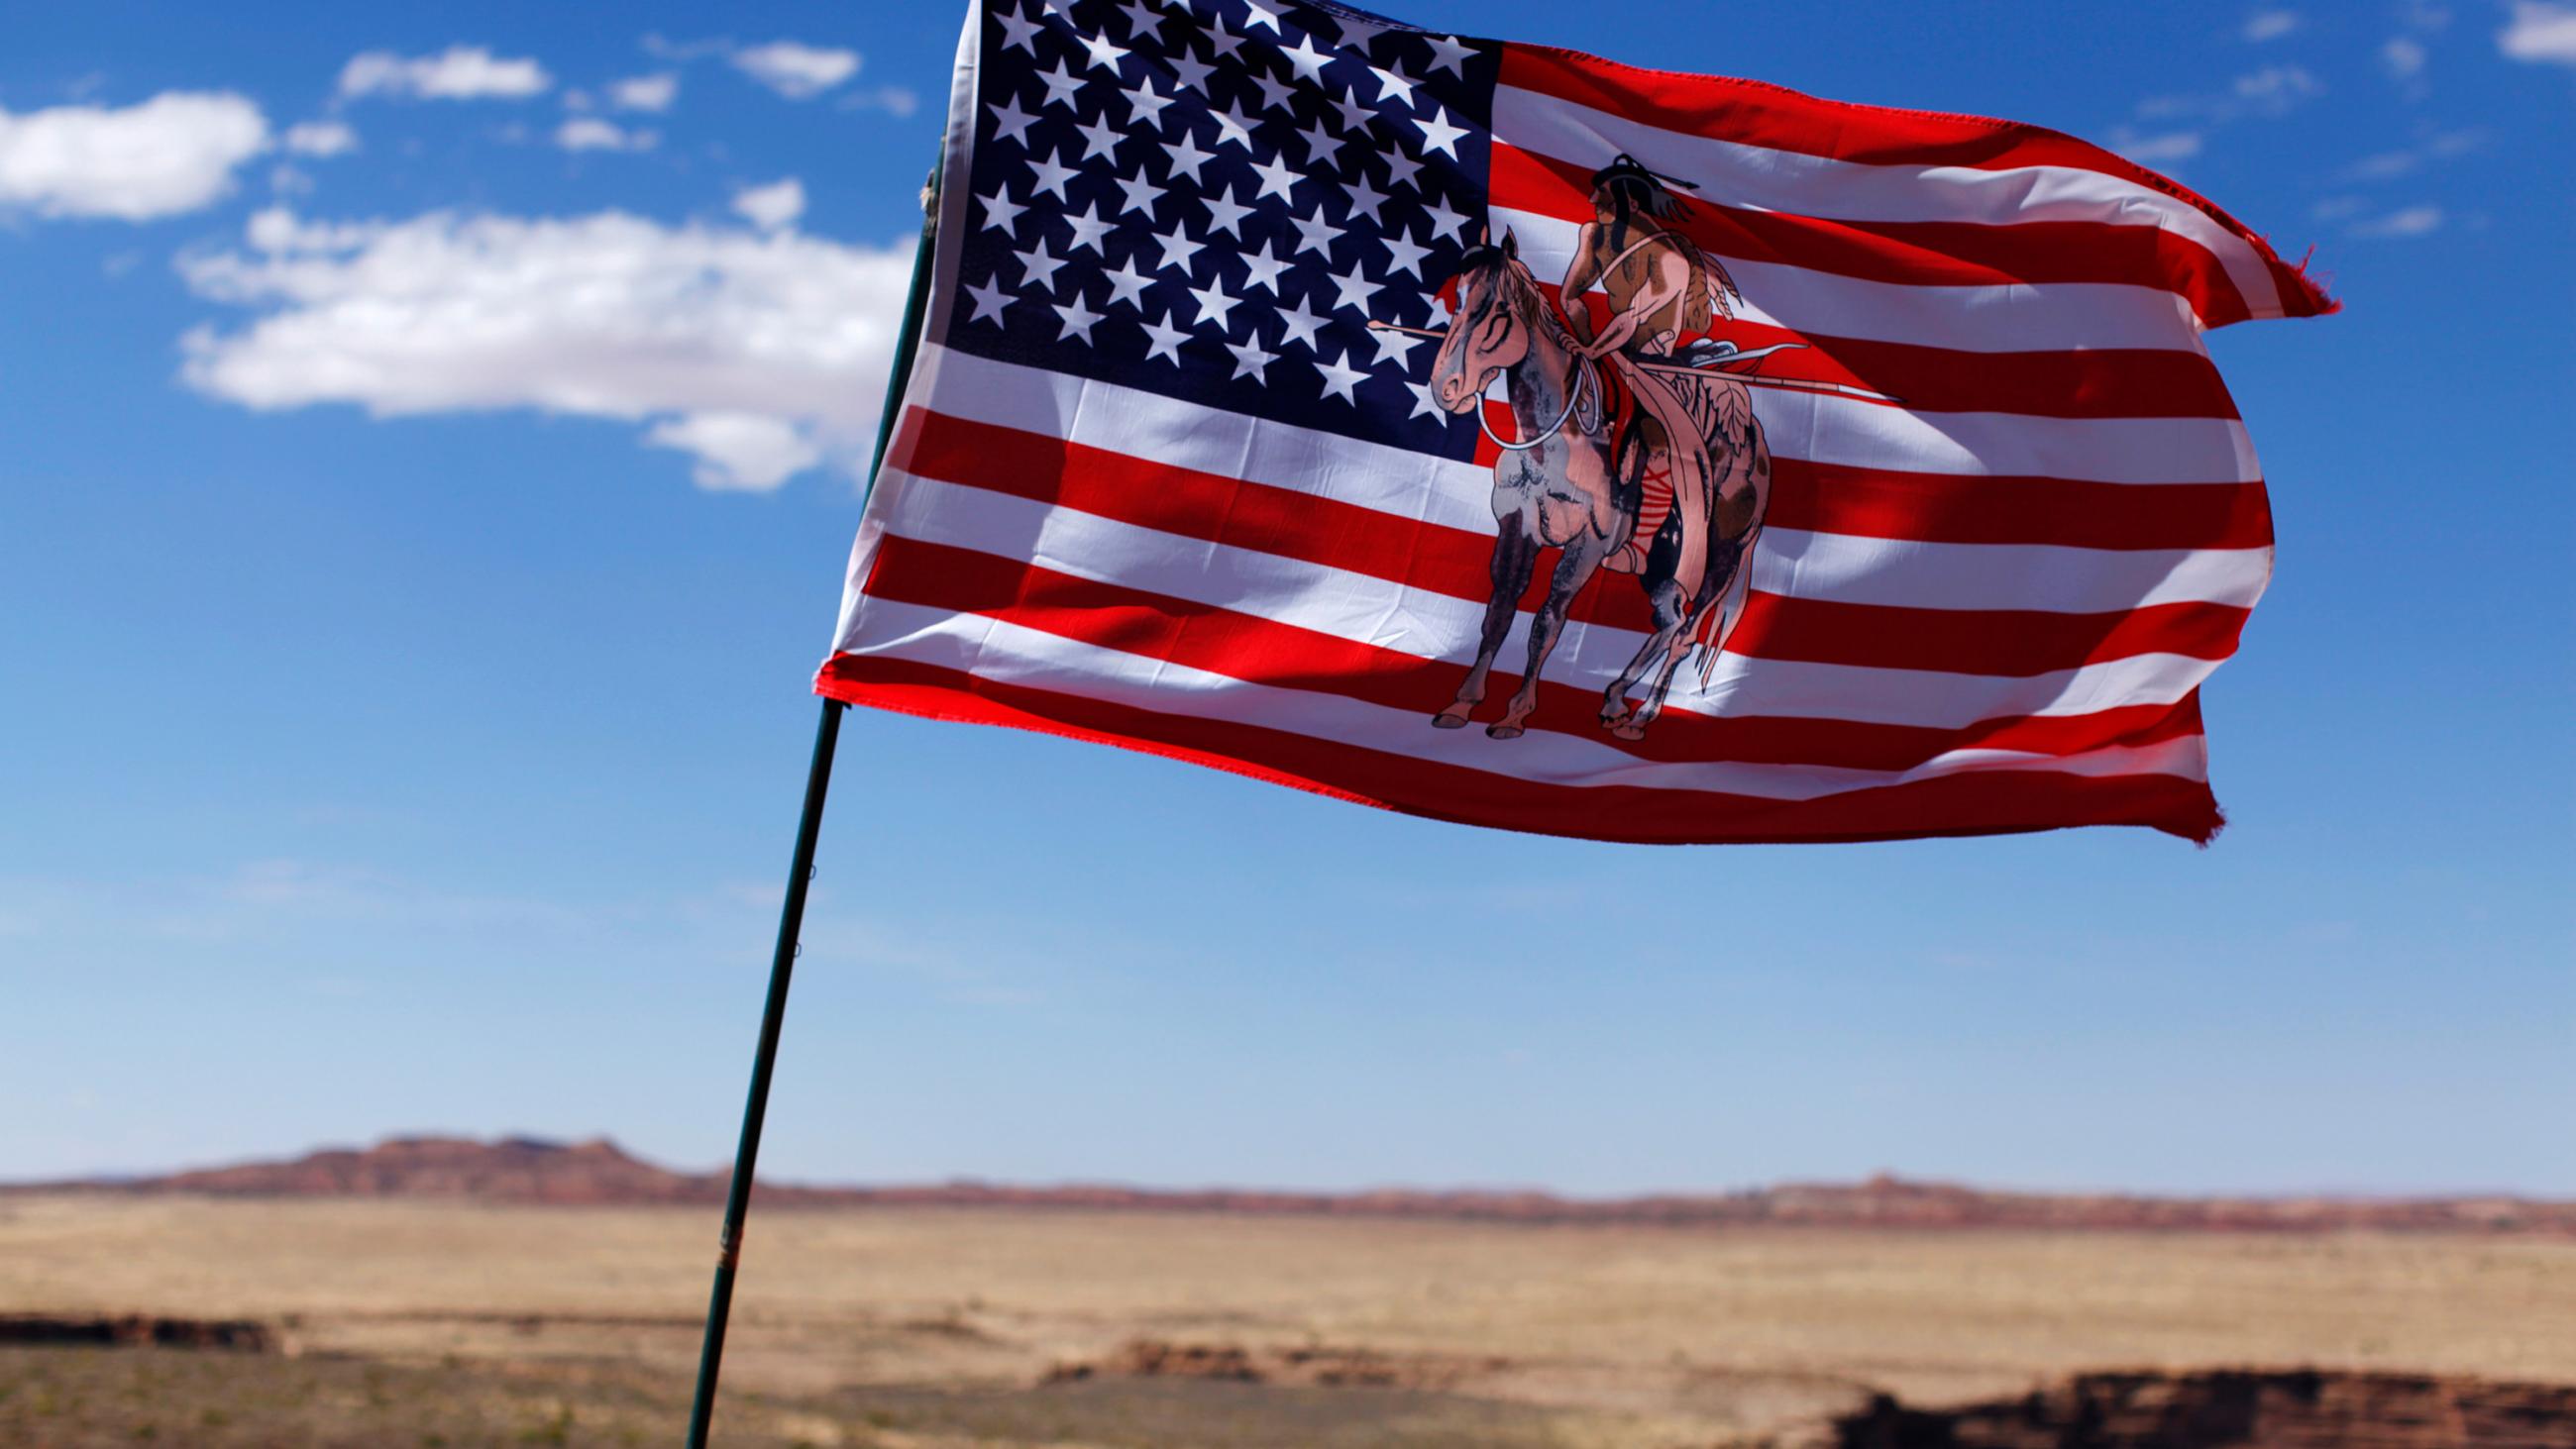 The photo shows a flag blowing in the wind with an Indian horse rider on the flag. 